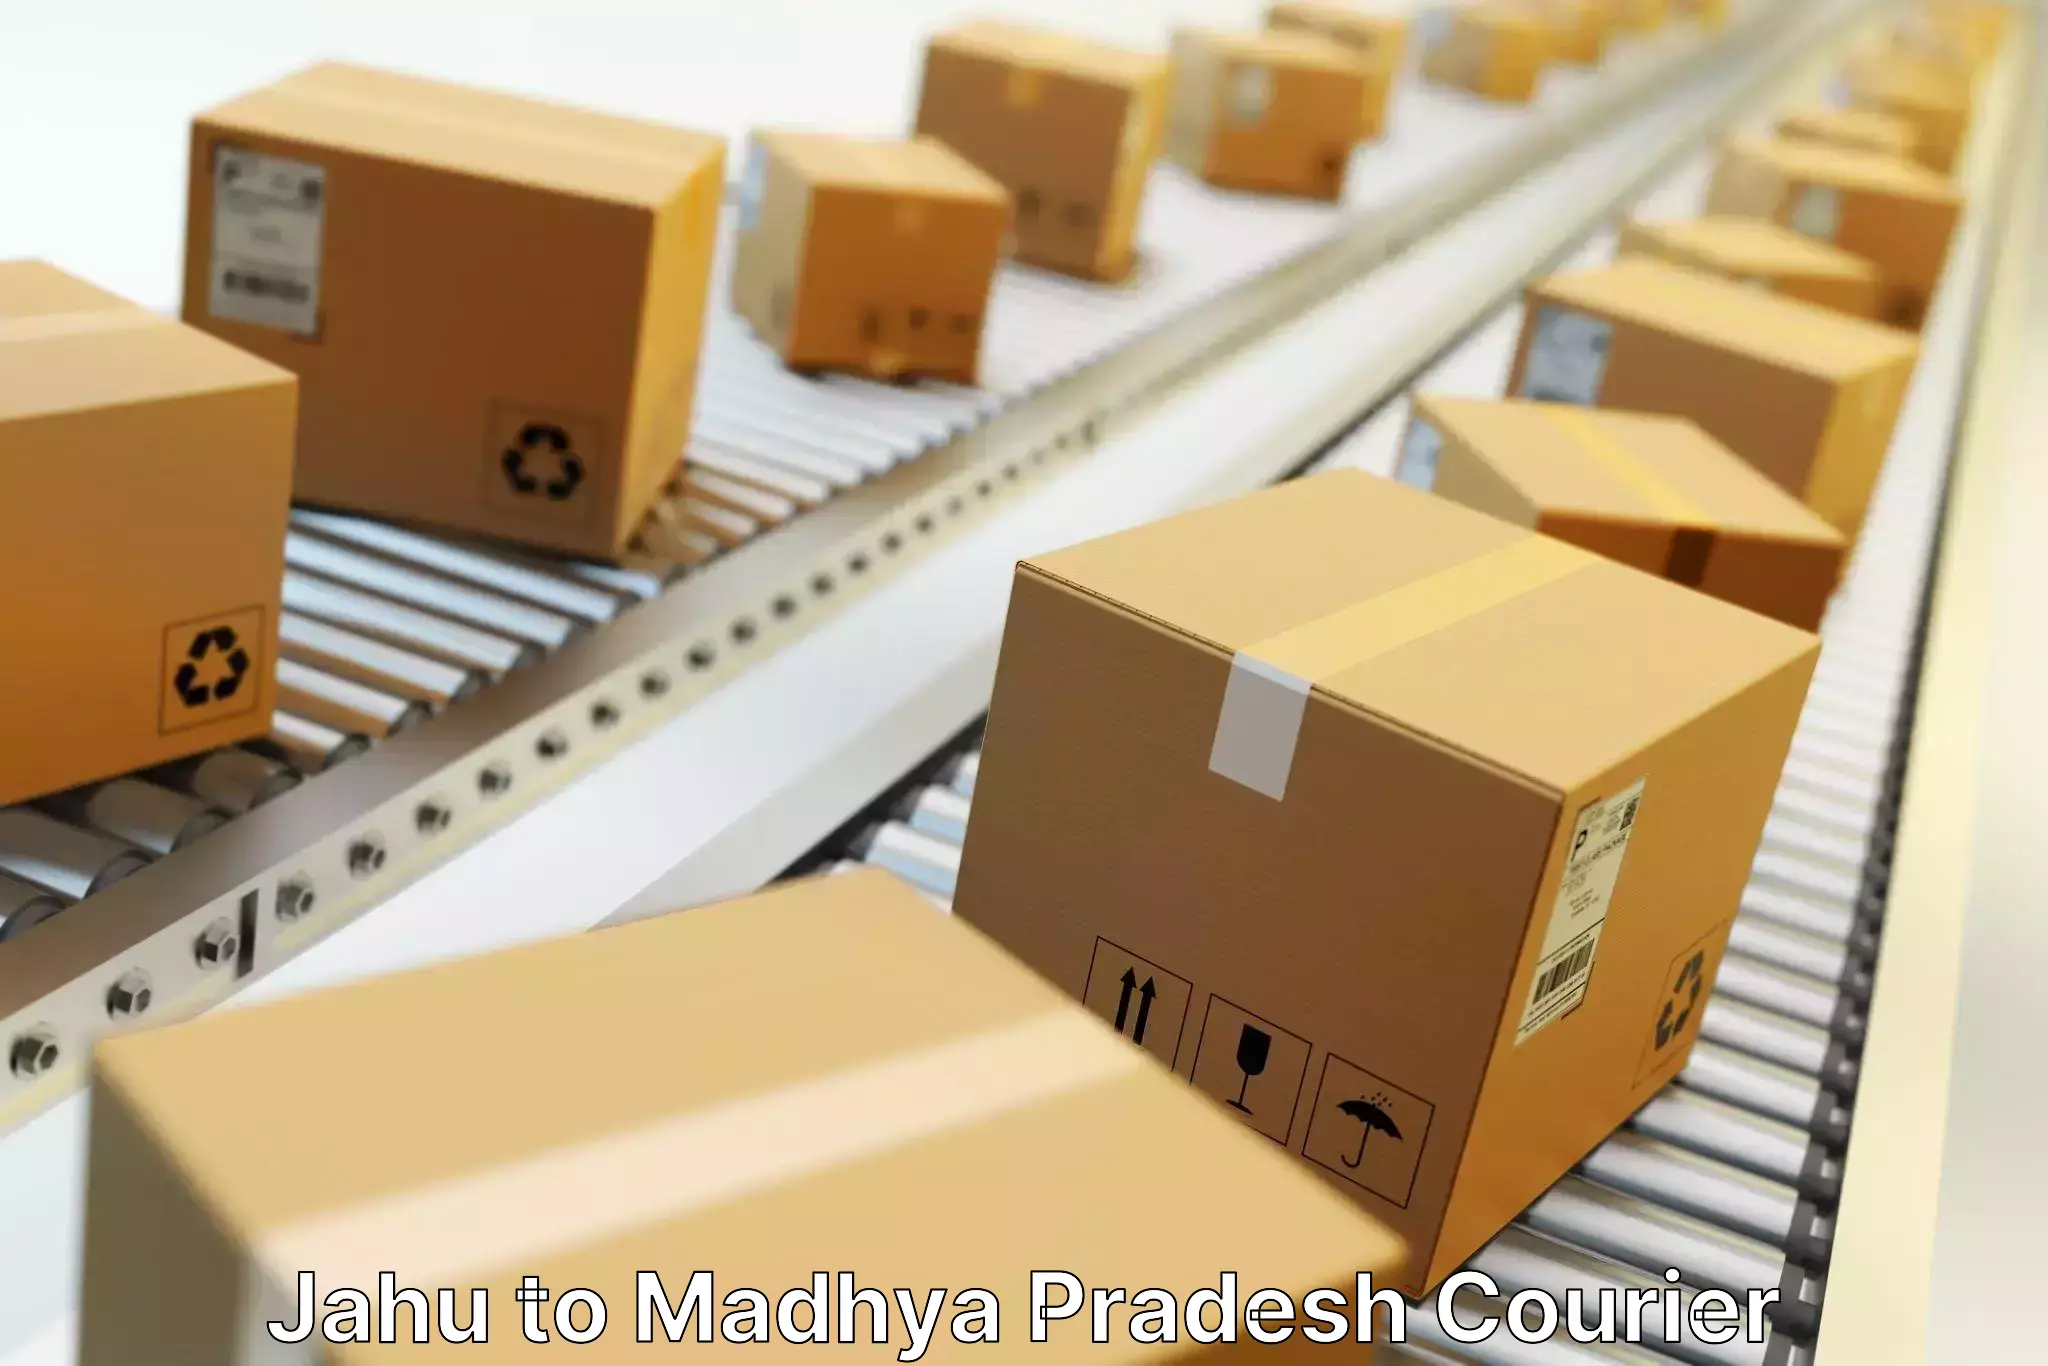 Express delivery capabilities Jahu to Gwalior